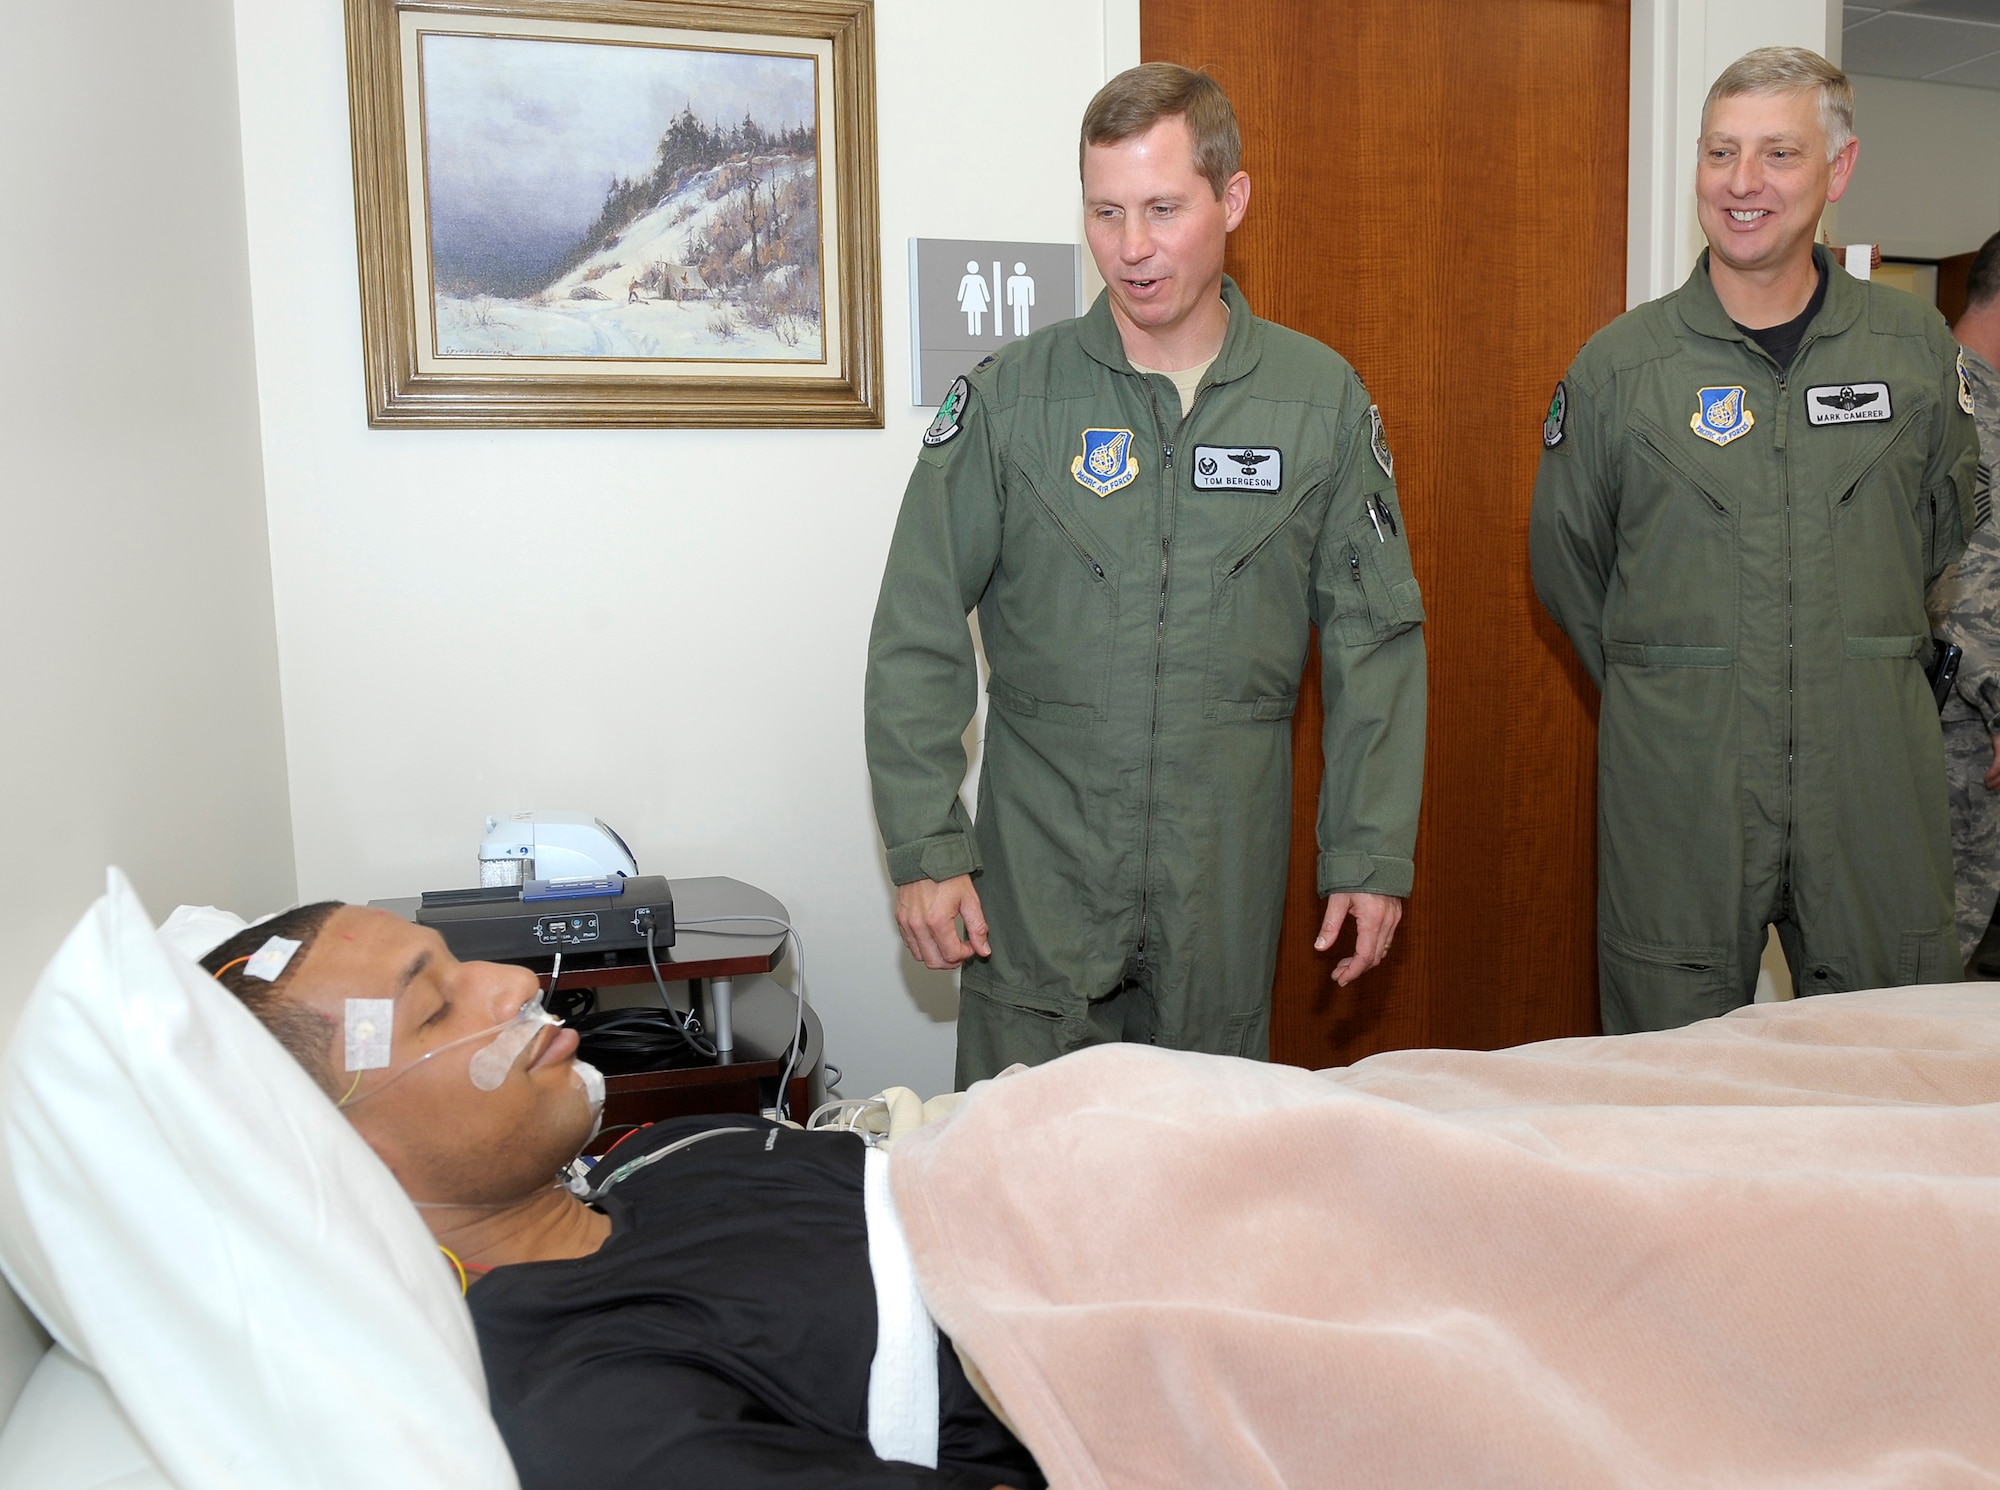 ELMENDORF AIR FORCE BASE, Alaska -- Col. Thomas Bergeson and Col. Mark Camerer check out Senior Airman Curtis Singleton, posing as a mock patient, during the grand opening of the Elmendorf Sleep Clinic June 26. This clinic will have the ability to record brain activity, eye movement, oxygen and carbon dioxide blood levels, heart rate and rhythm, breathing rate and rhythm, snoring, leg movement, and chest and belly movement to help patients with sleep disorders. Bergeson is the 3rd Wing commander and Camerer is the 3rd Wing vice commander. (U.S. Air Force photo/Master Sgt. Keith Brown)